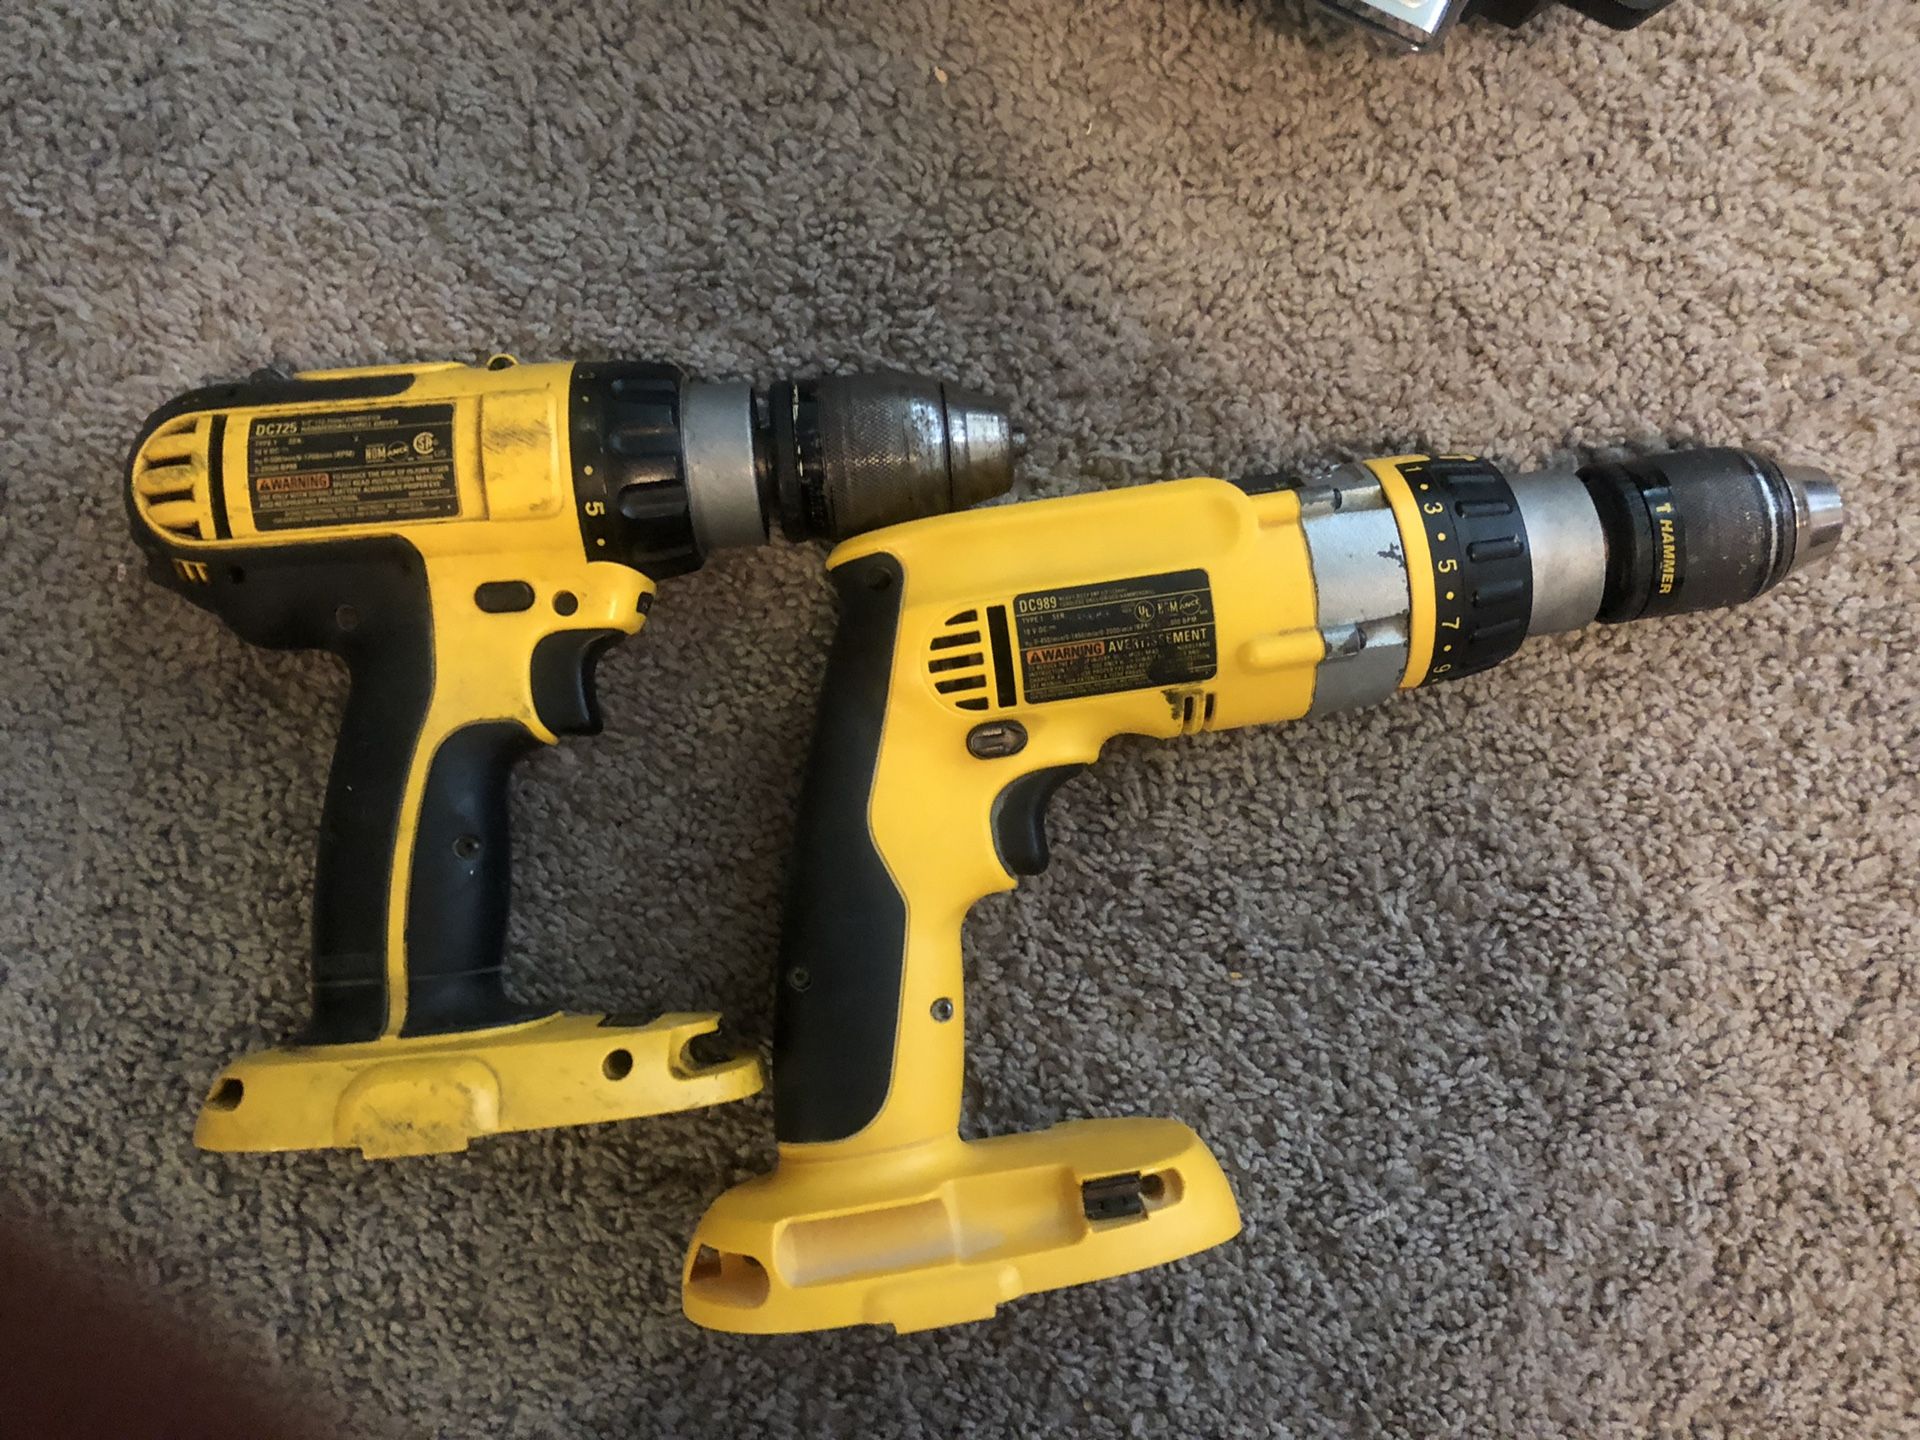 recibo sensor riesgo Dewalt DC725 and DC979, 18 Volt Cordless Drills, With 5 Batteries, Charger,  Case. Read Description. The Dewalt DC725 Drill is in Fair Cosmetic condit  for Sale in Bel Air, MD - OfferUp